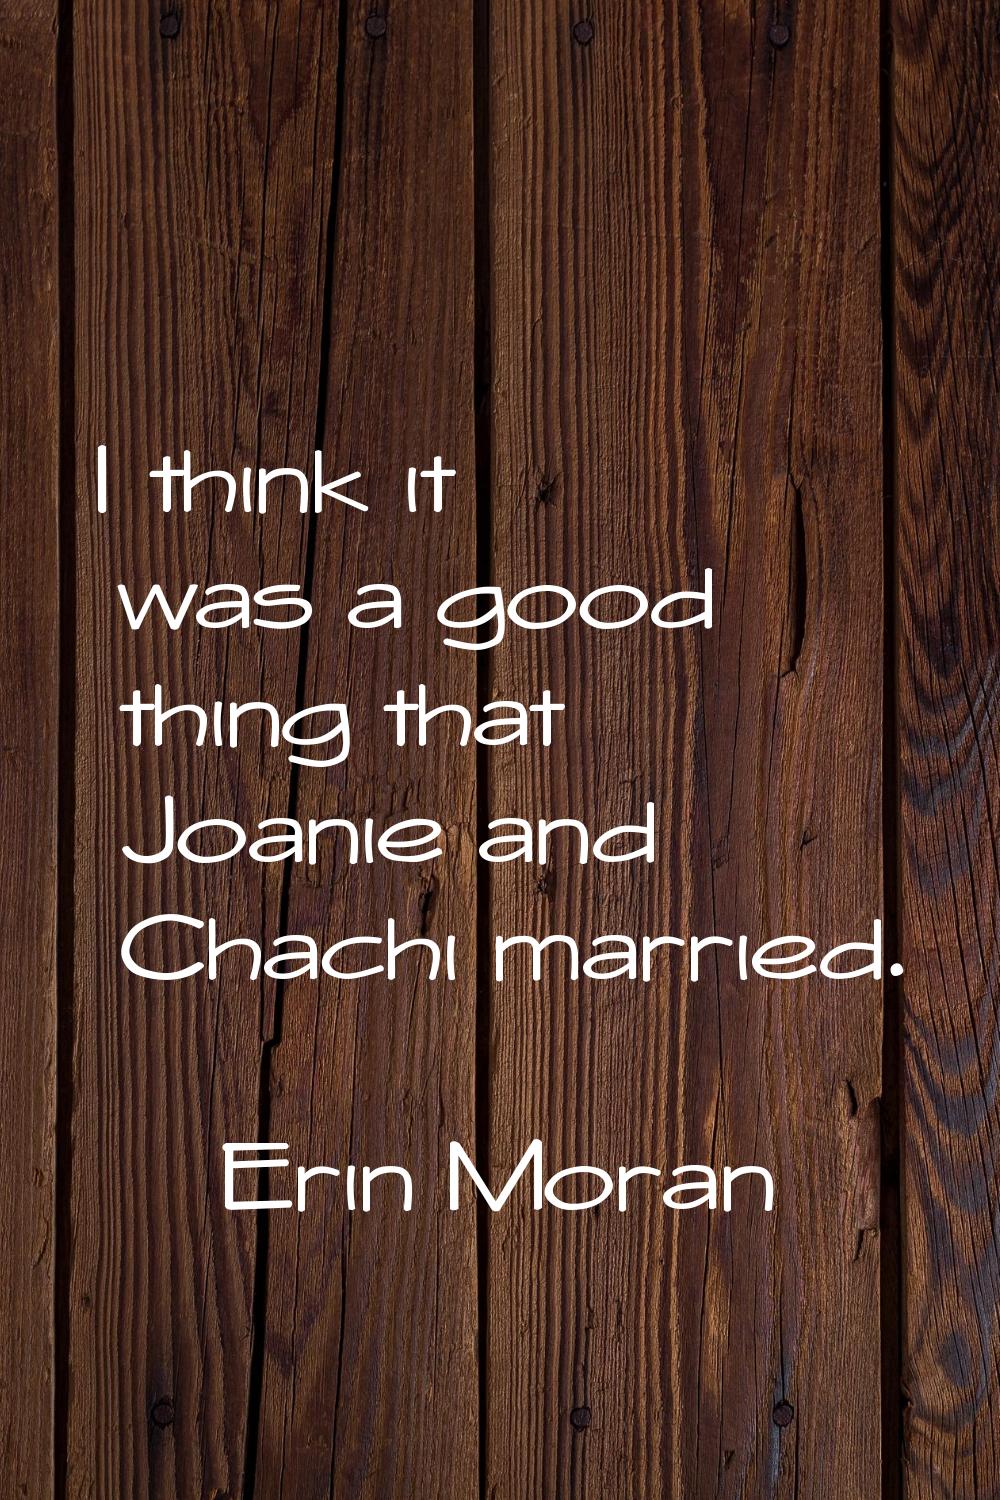 I think it was a good thing that Joanie and Chachi married.